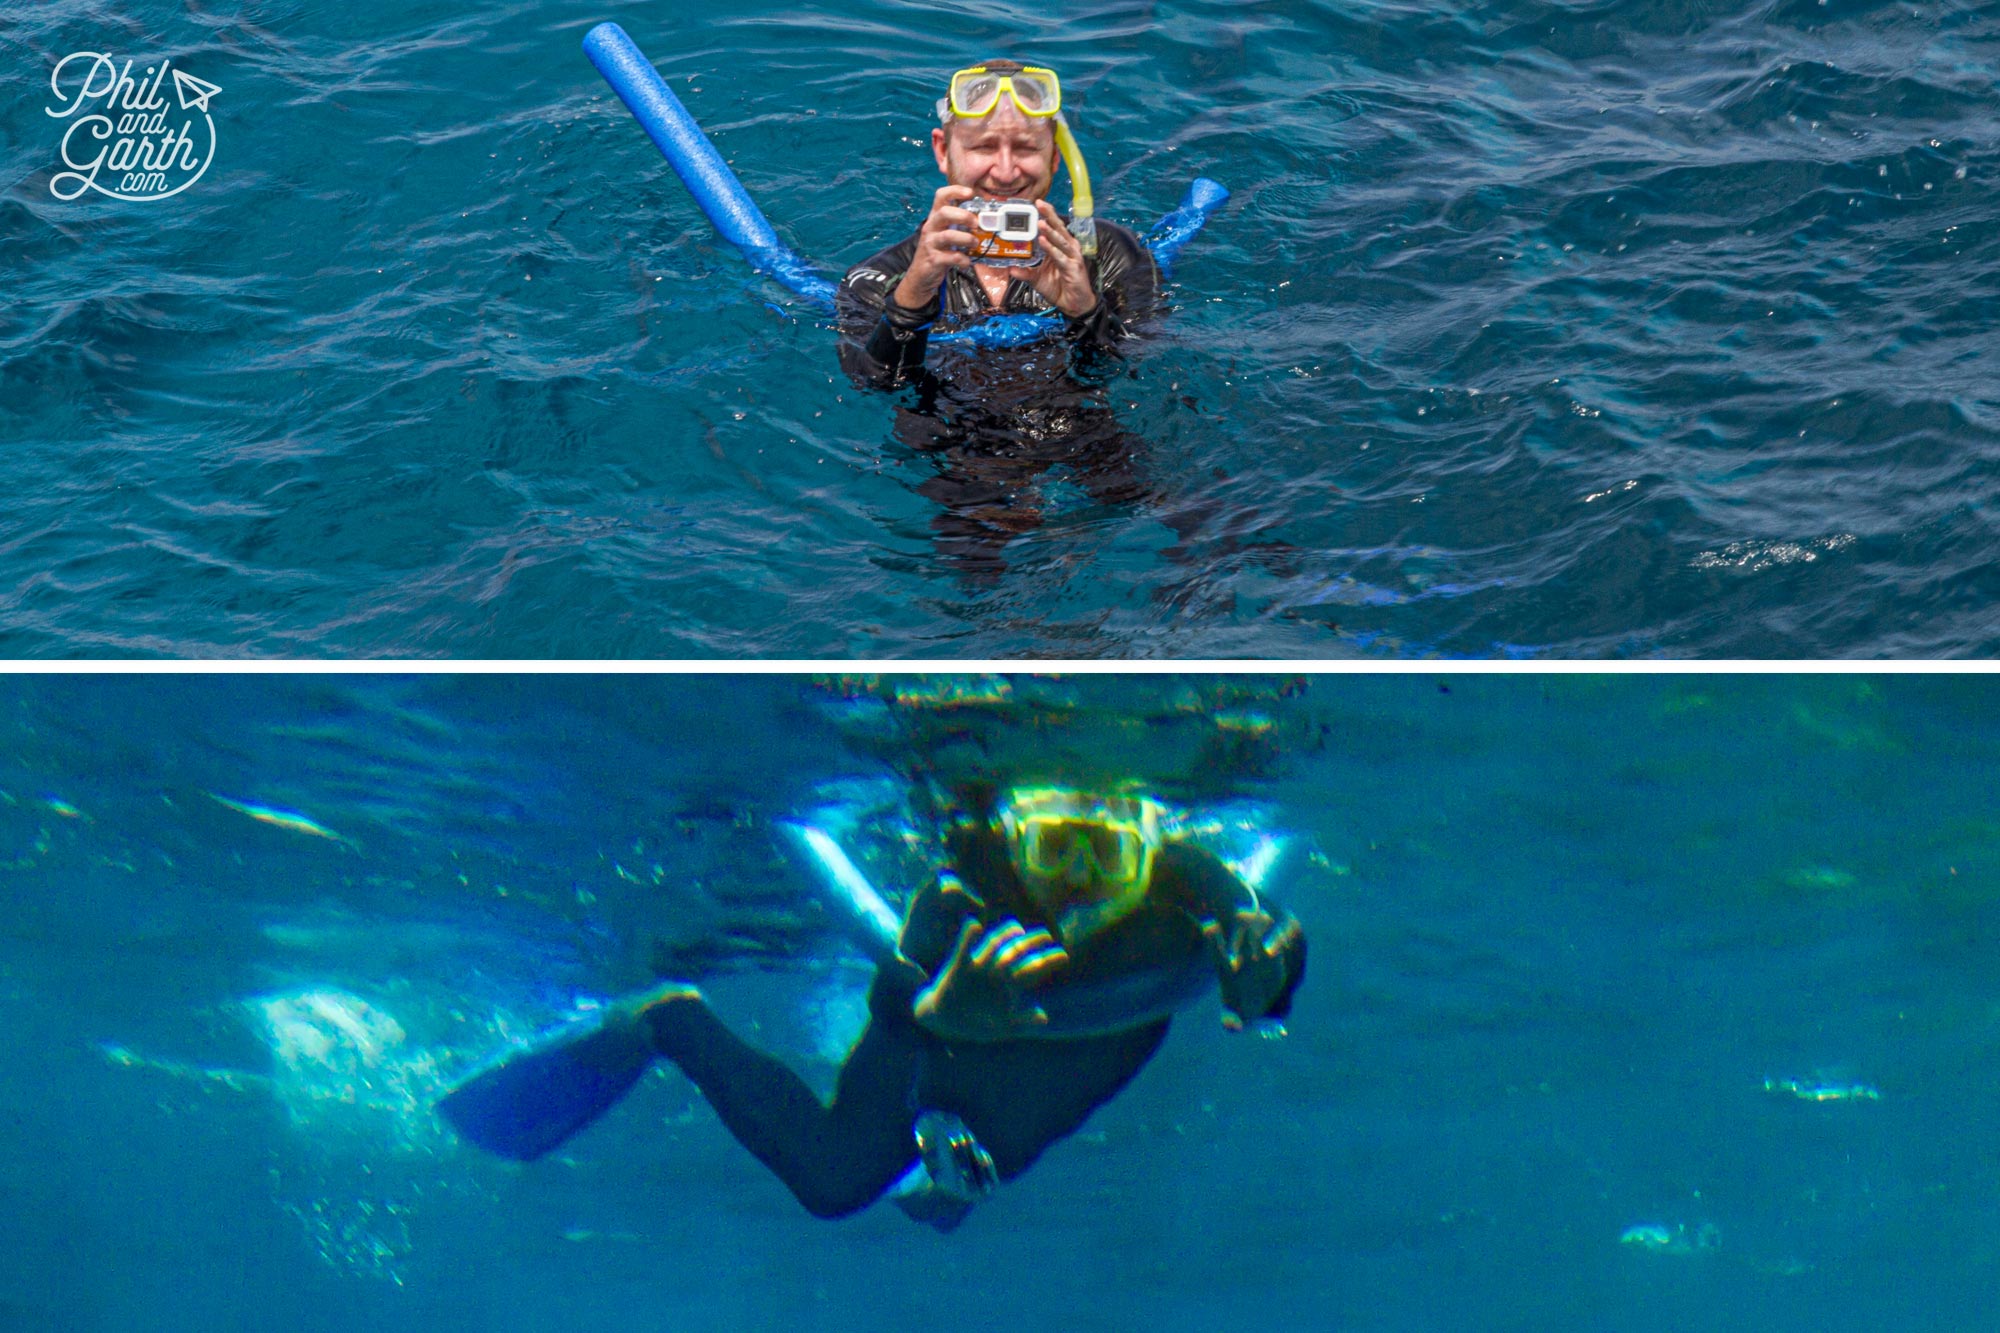 Garth above and below the waters of the Great Barrier Reef